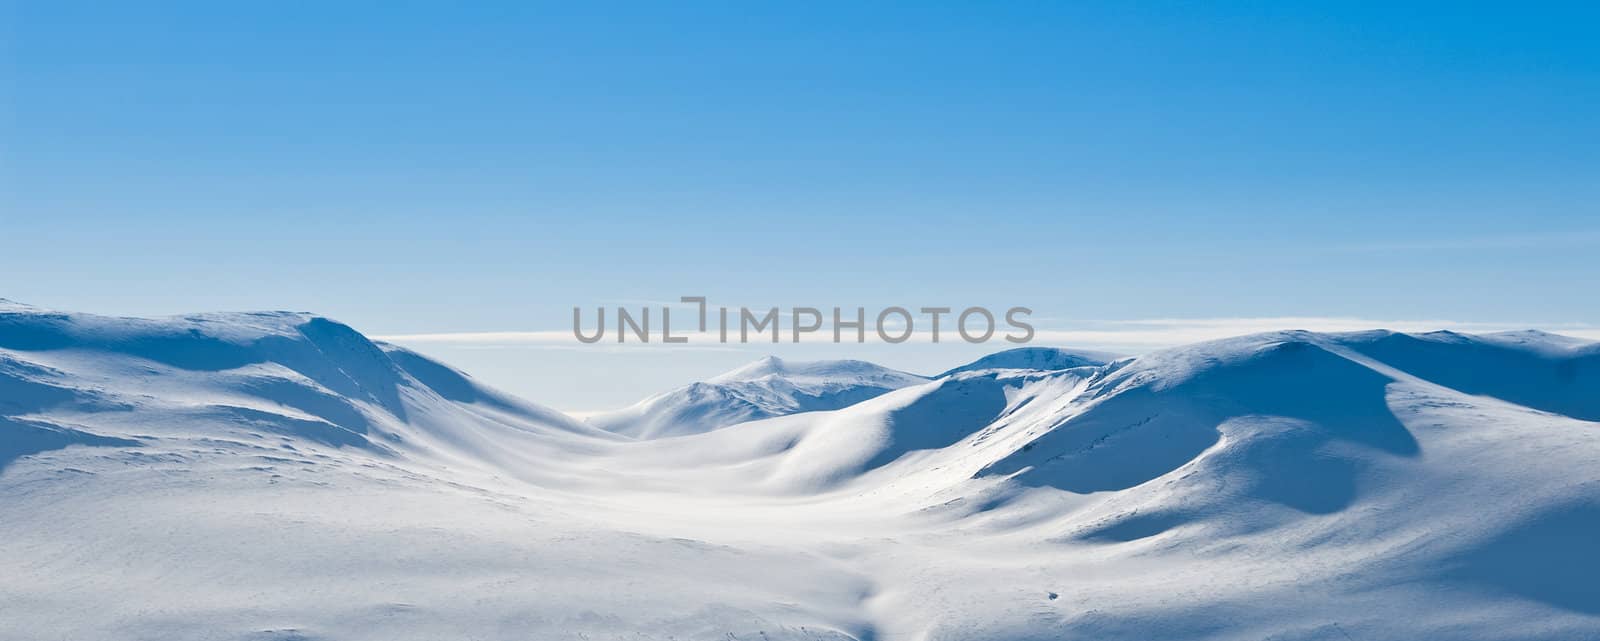 A snowy mountain landscape on a beautiful winter day. Picture taken in Oppdal, Norway.